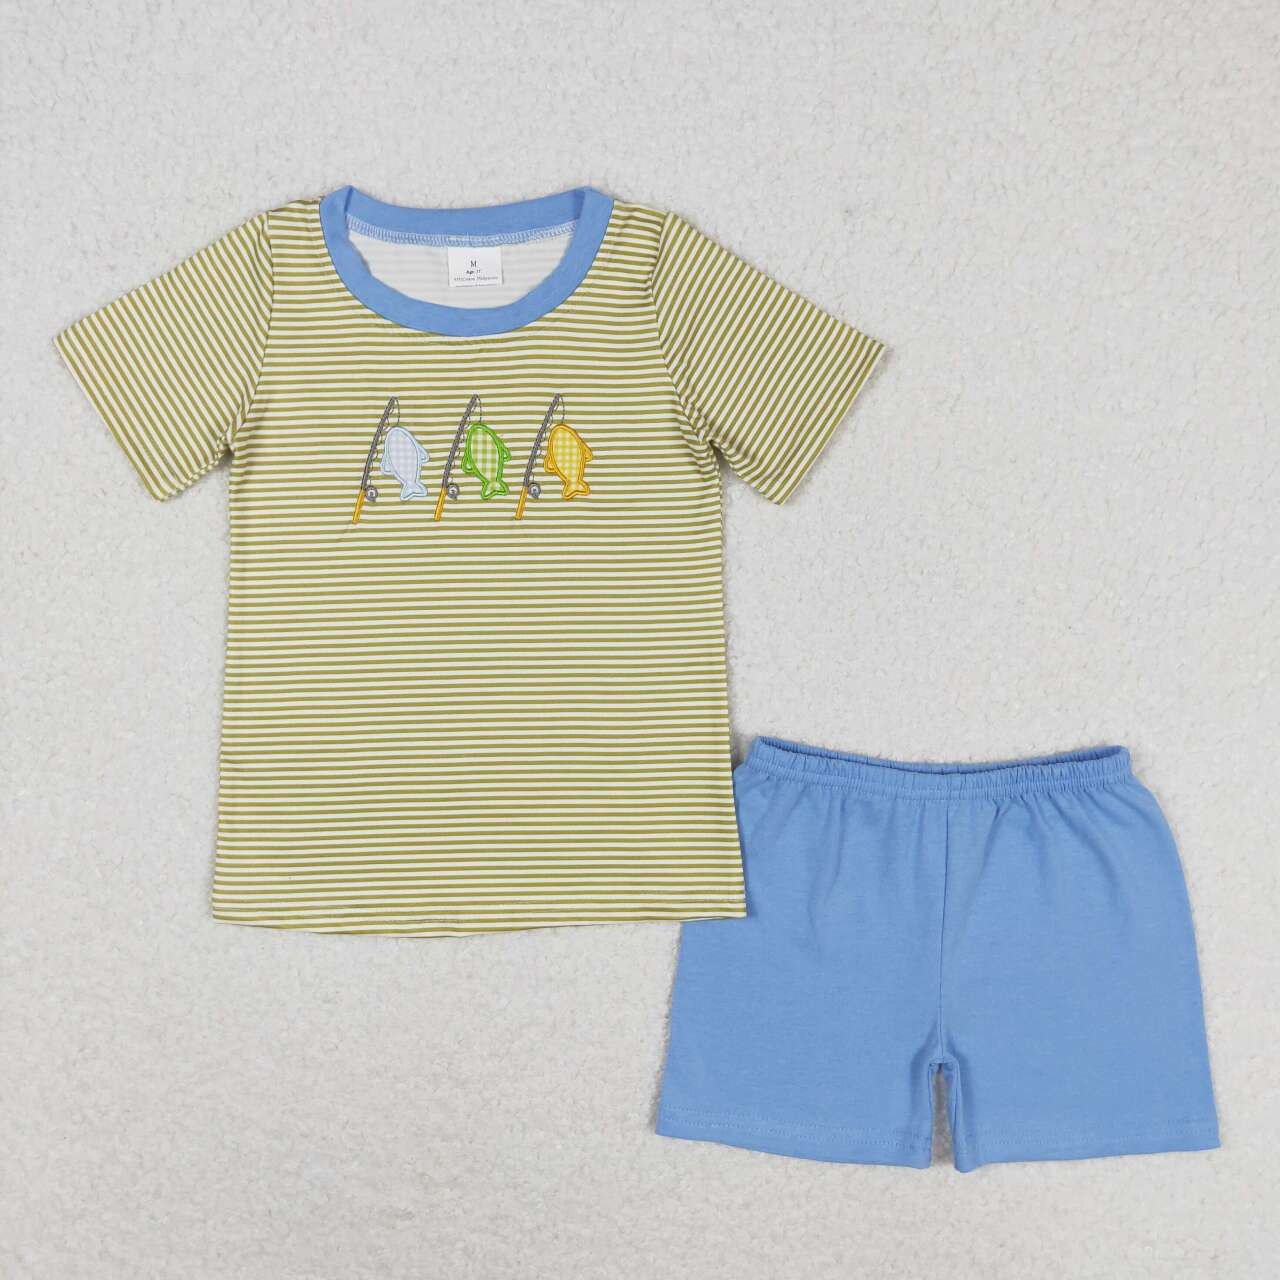 BSSO0732 Embroidered fishing yellow striped short sleeve blue shorts set